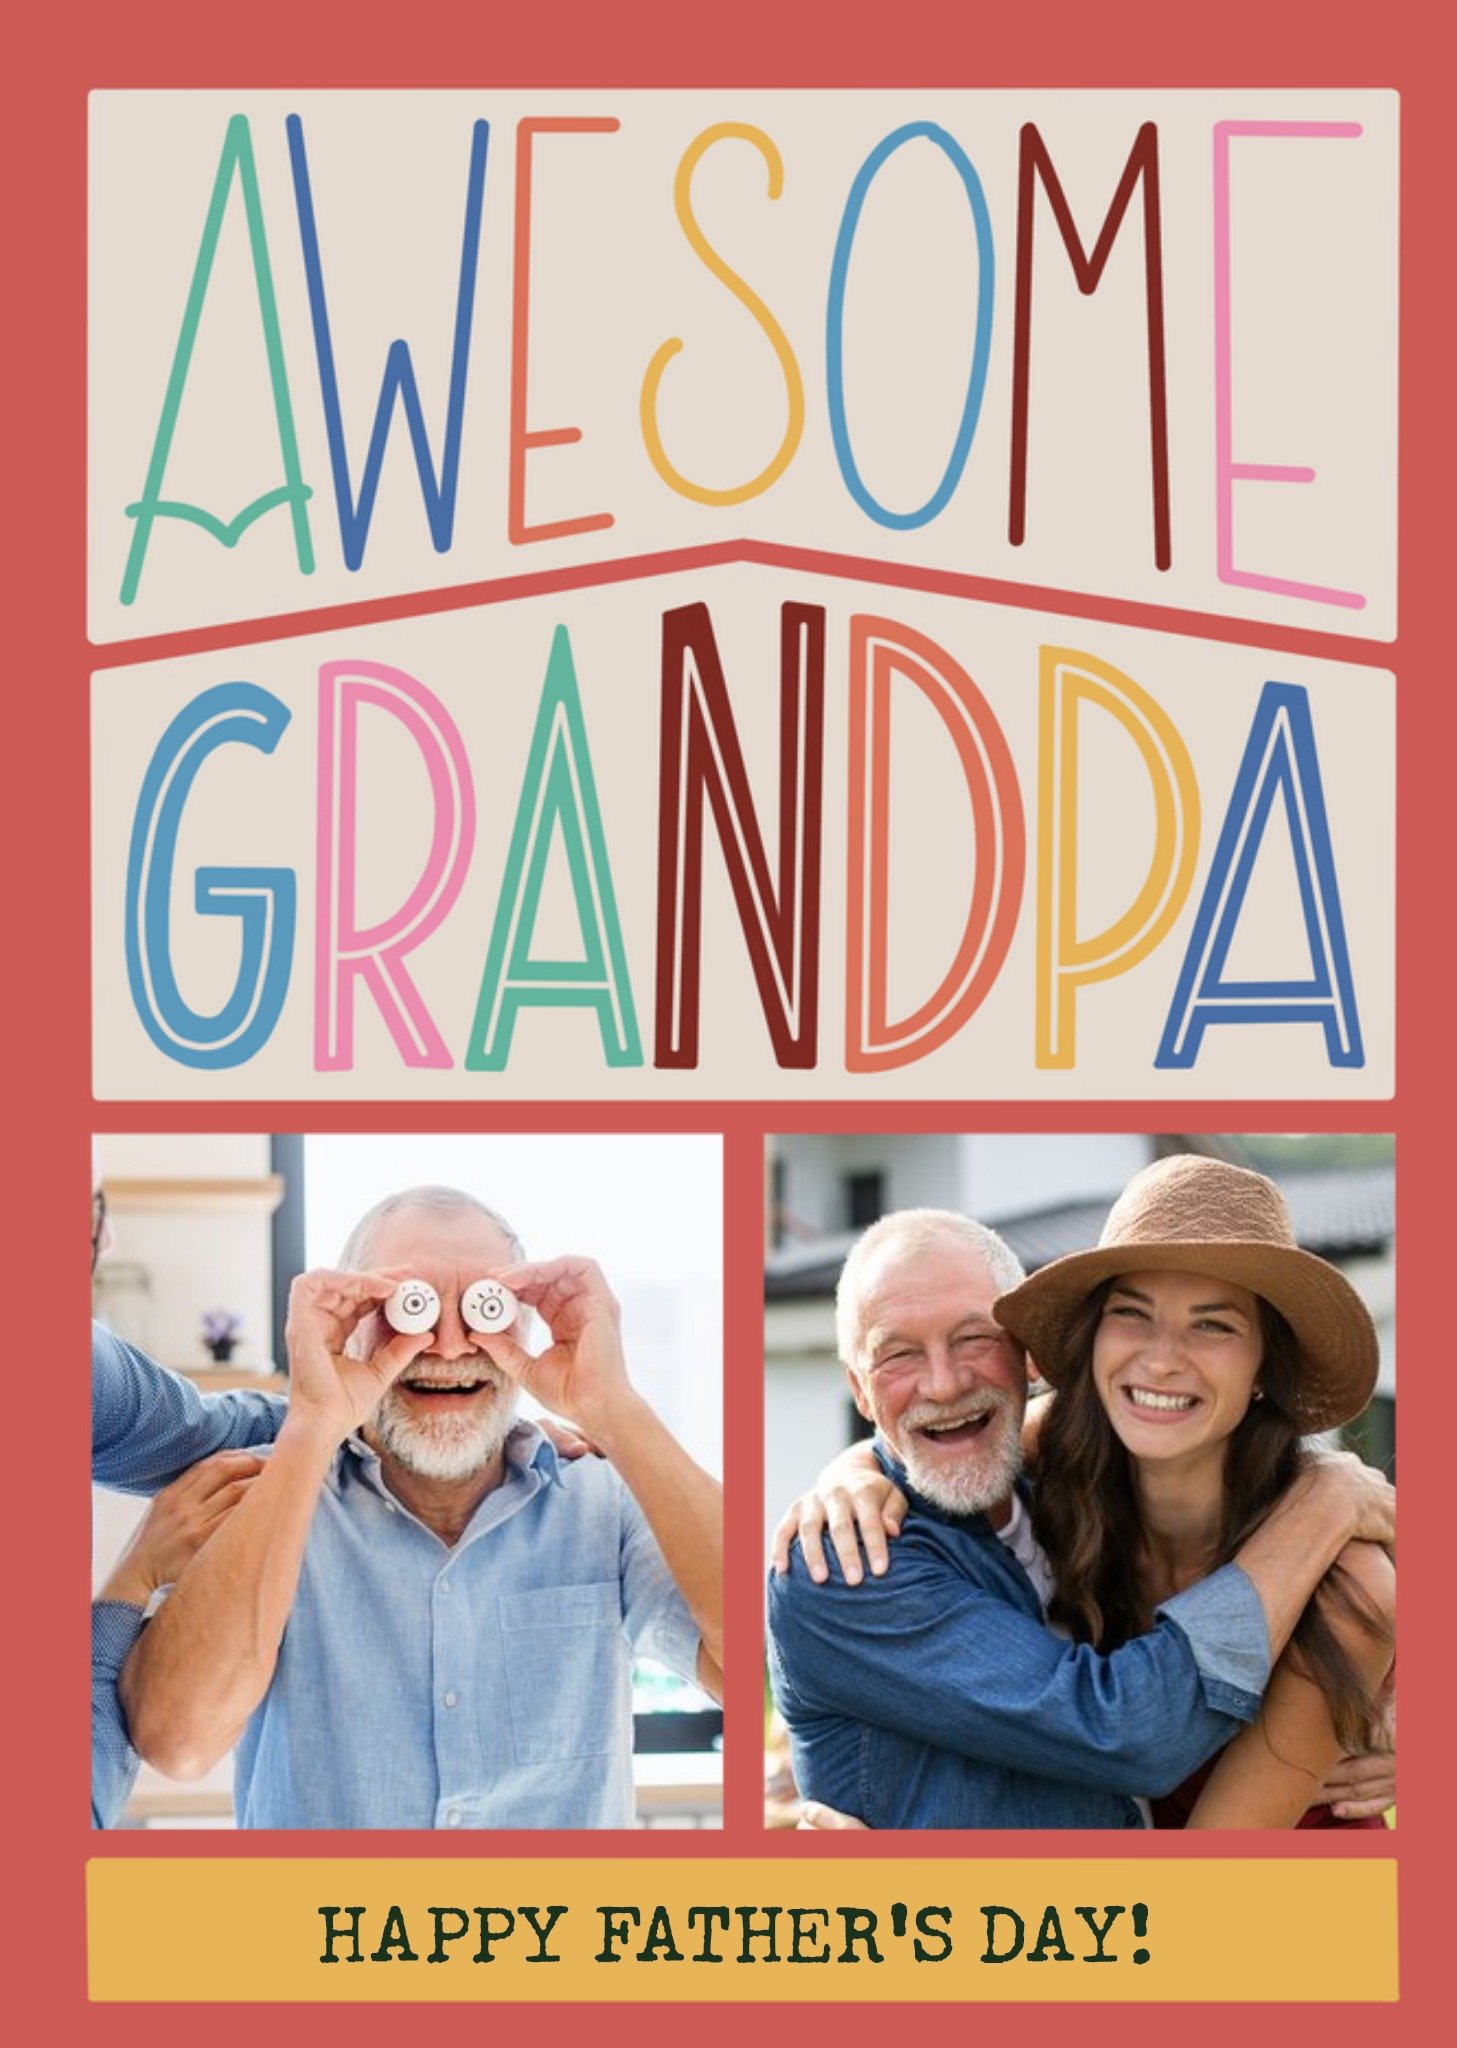 Moonpig Awesome Grandpa Cute Typographic Father's Day Photo Upload Card Ecard